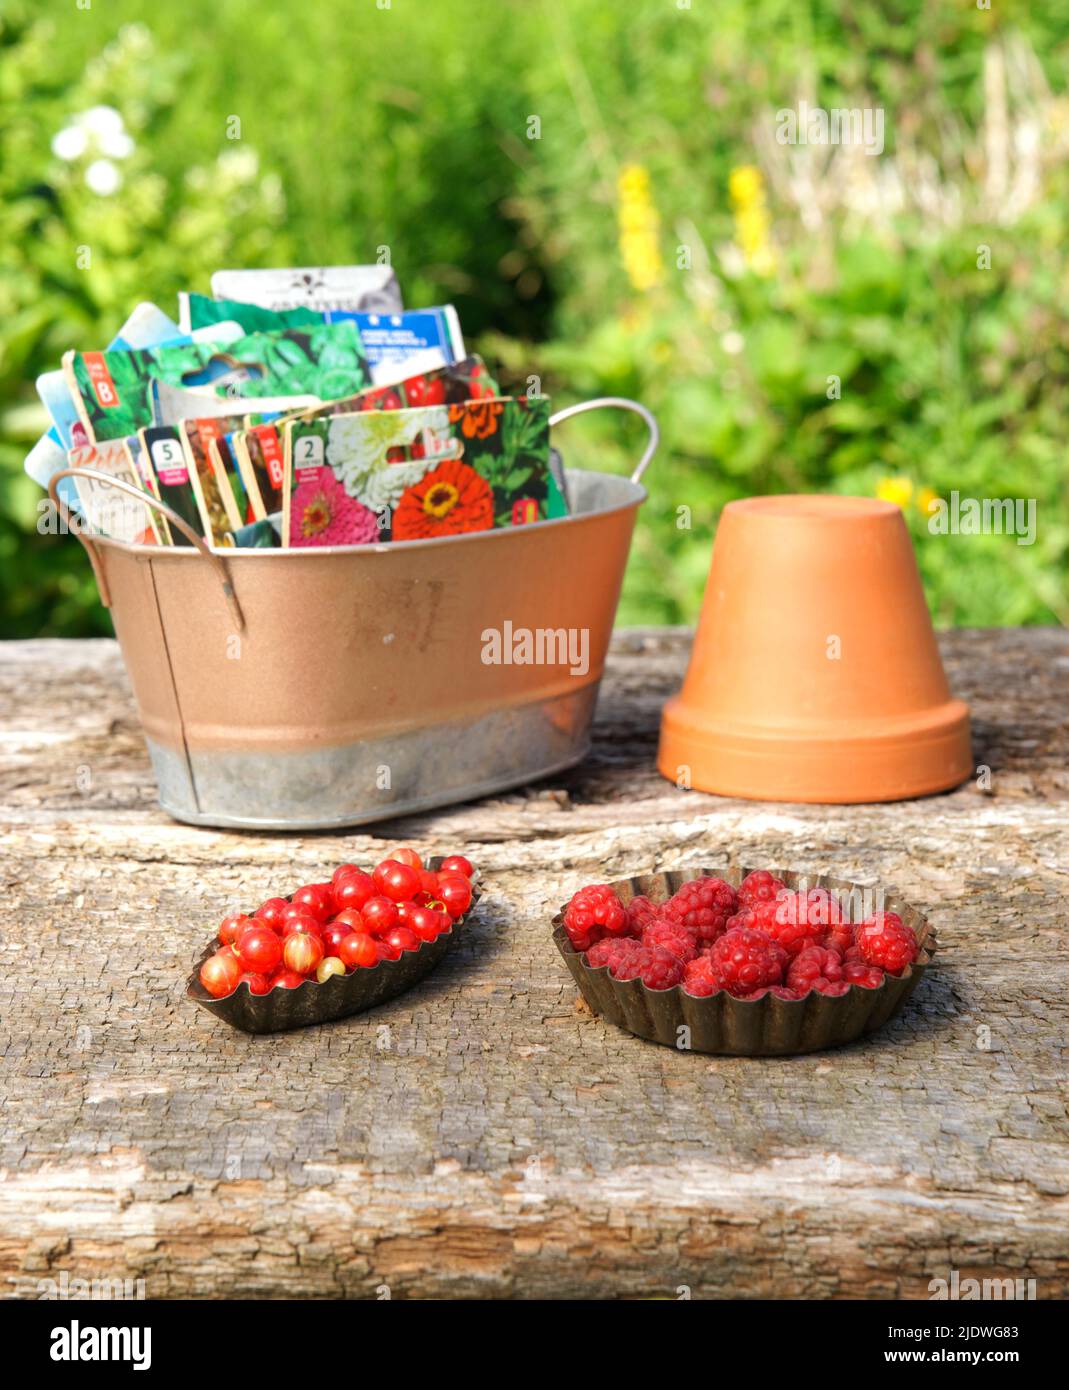 Small harvest of red berries from the vegetable garden : currants and raspberries Stock Photo